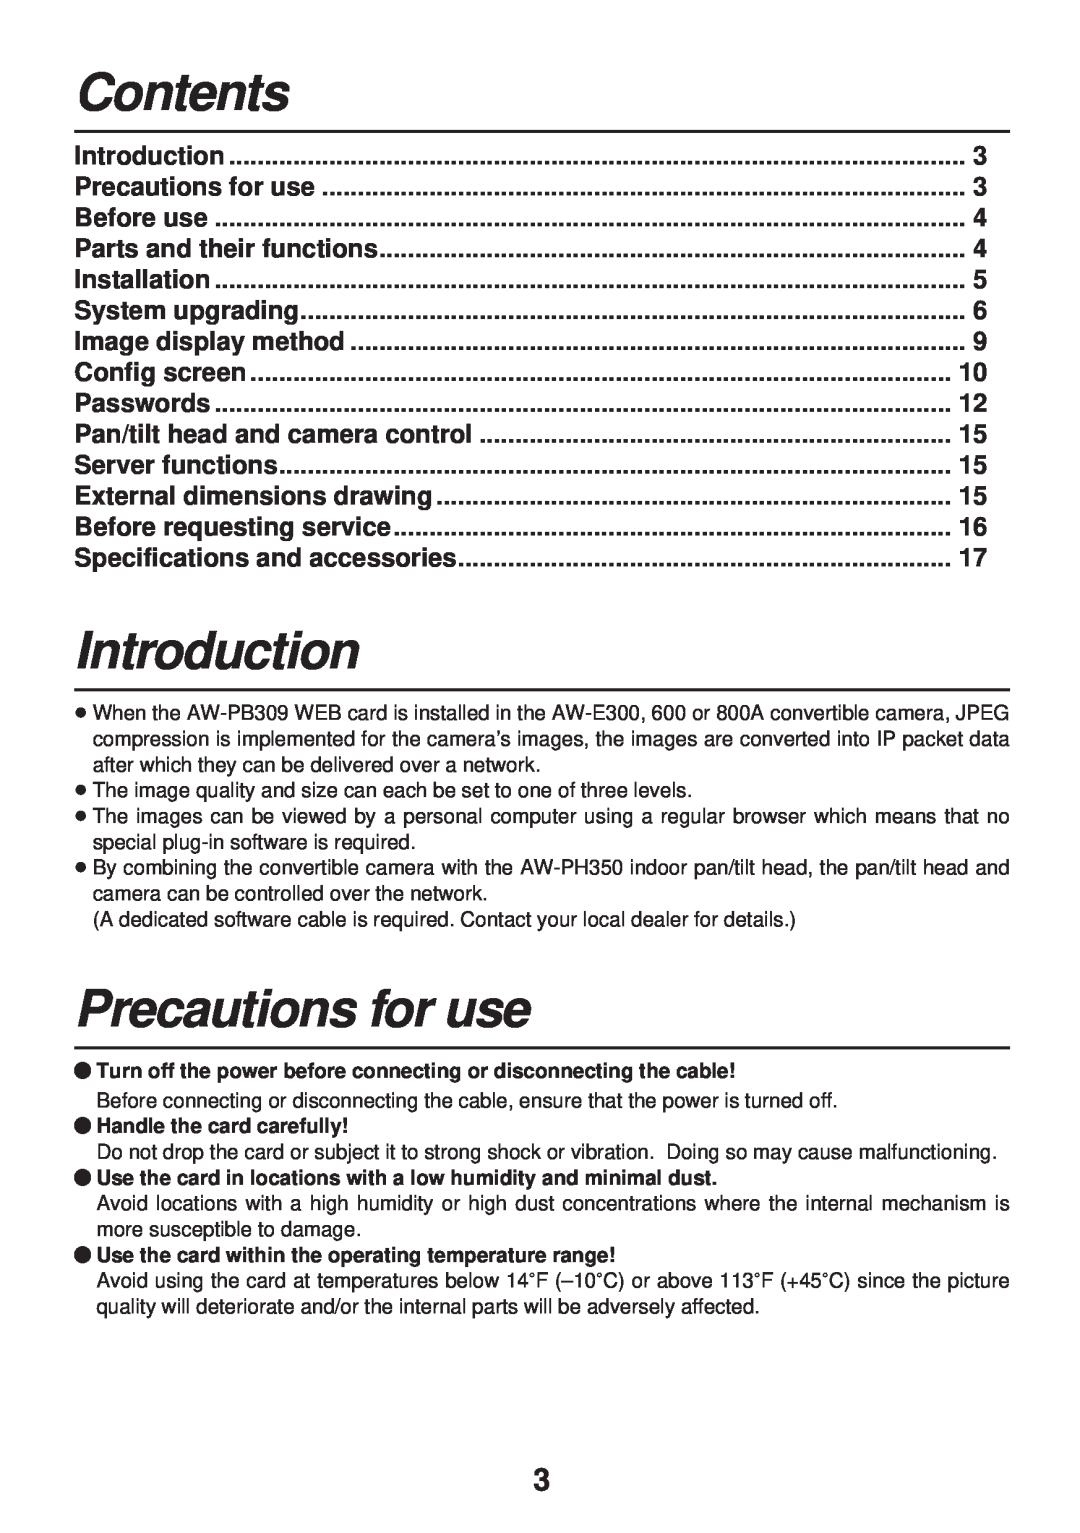 Panasonic AW-PB309P manual Contents, Introduction, Precautions for use 